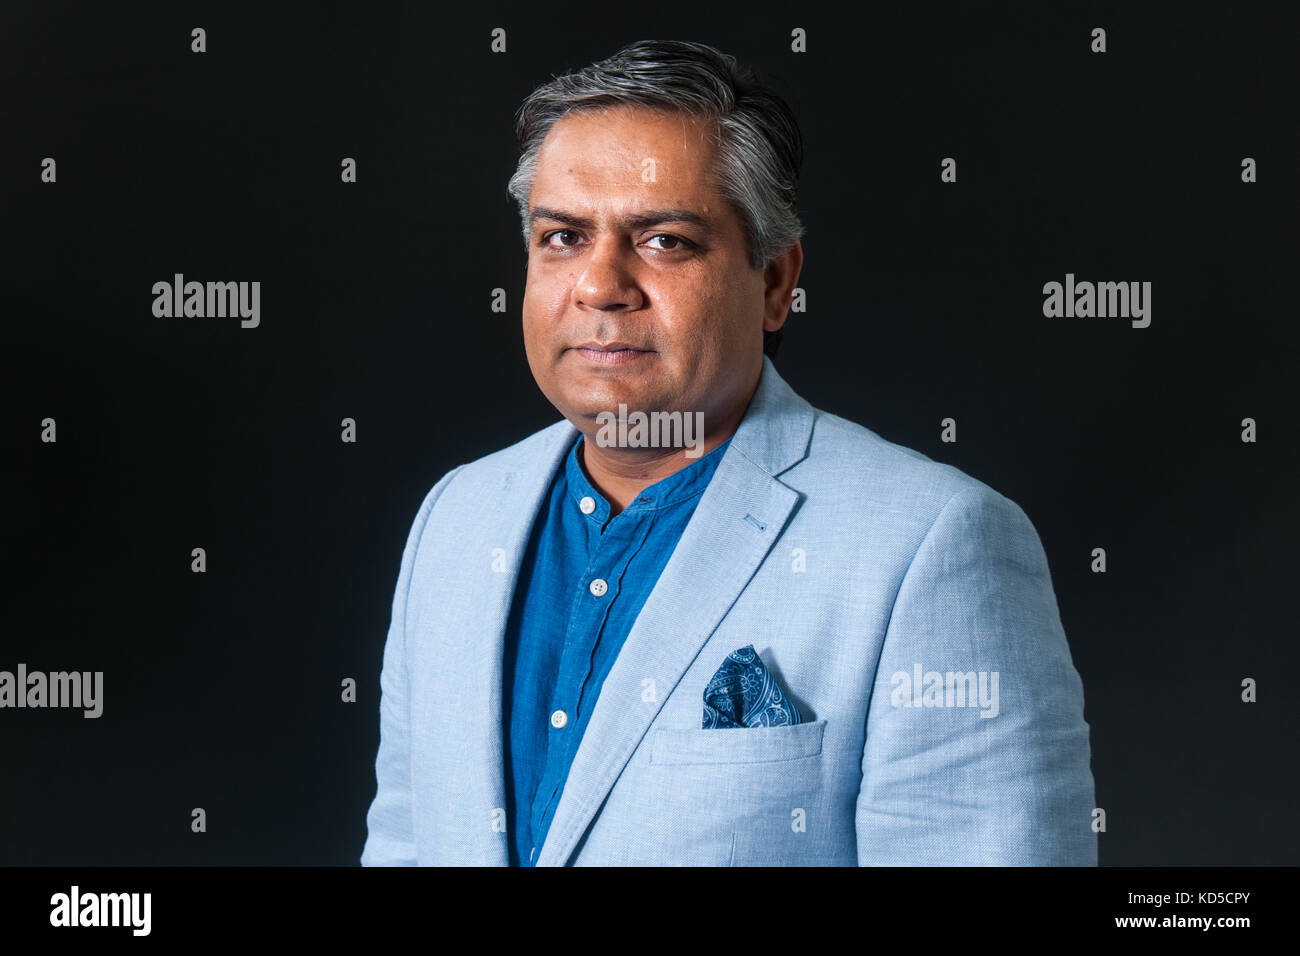 London-based Indian chef, restaurateur, and media personality Vivek Singh attends a photocall during the Edinburgh International Book Festival on Augu Stock Photo